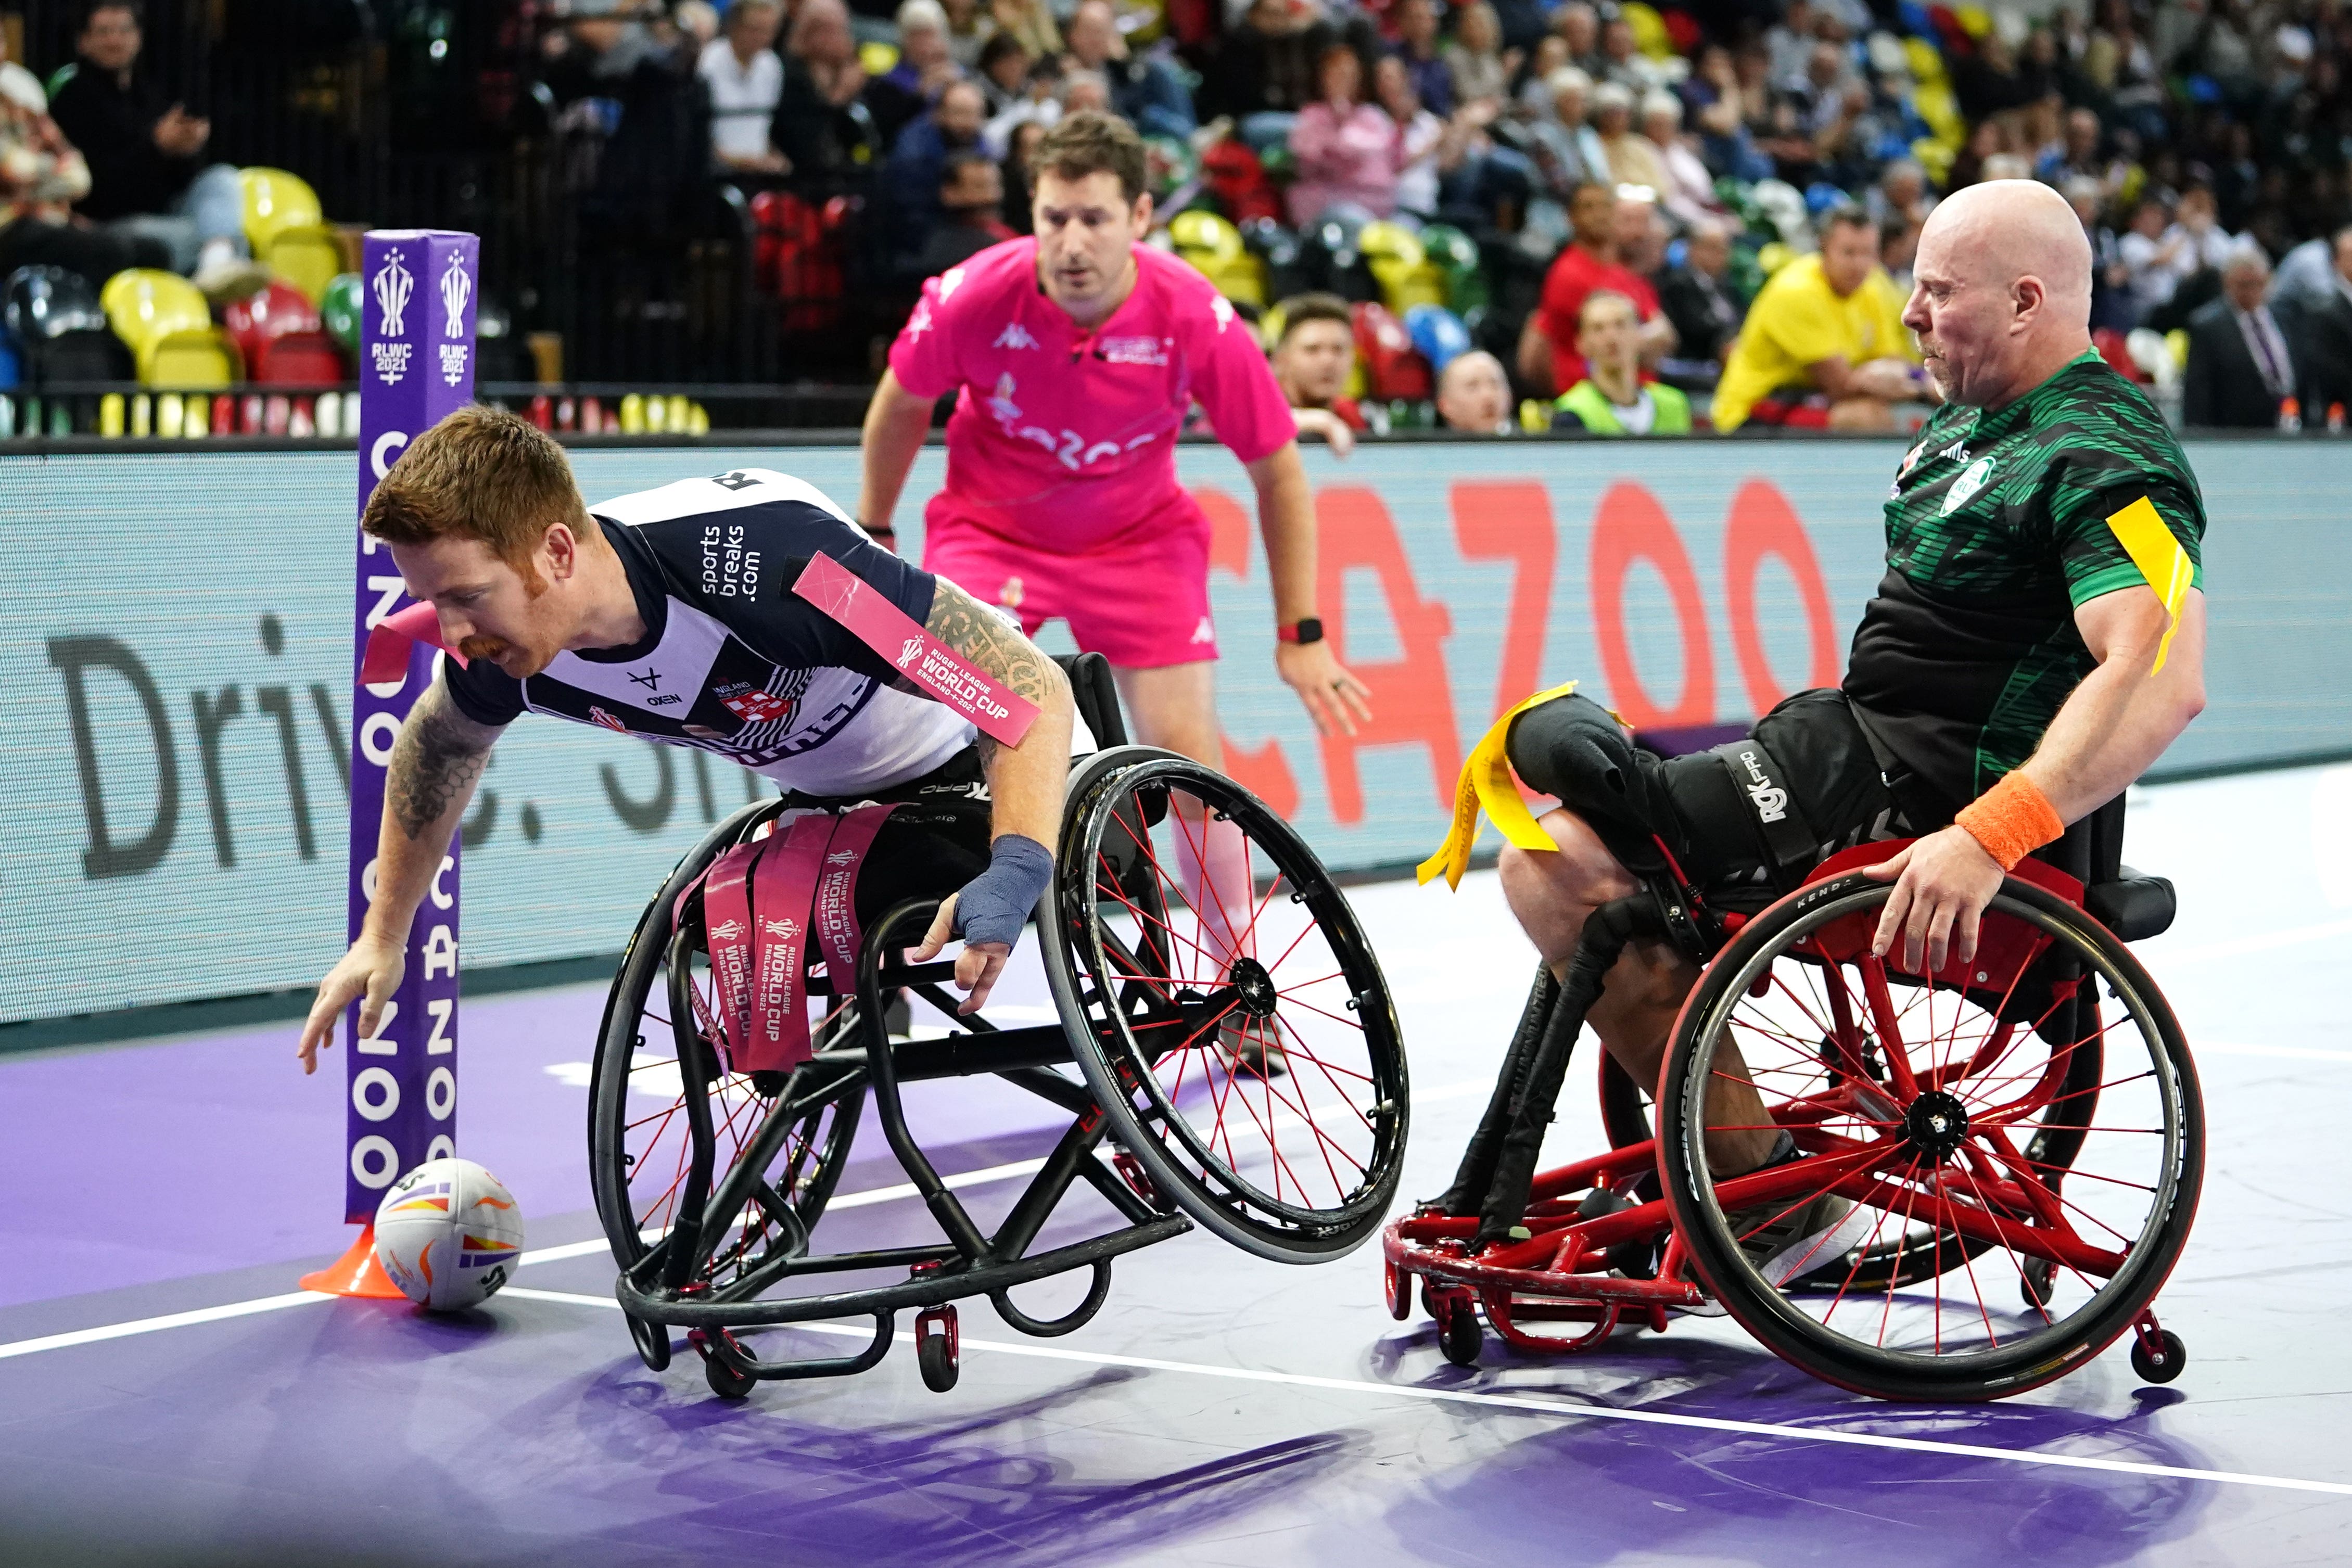 England are through to the semi-finals of the men’s wheelchair tournament